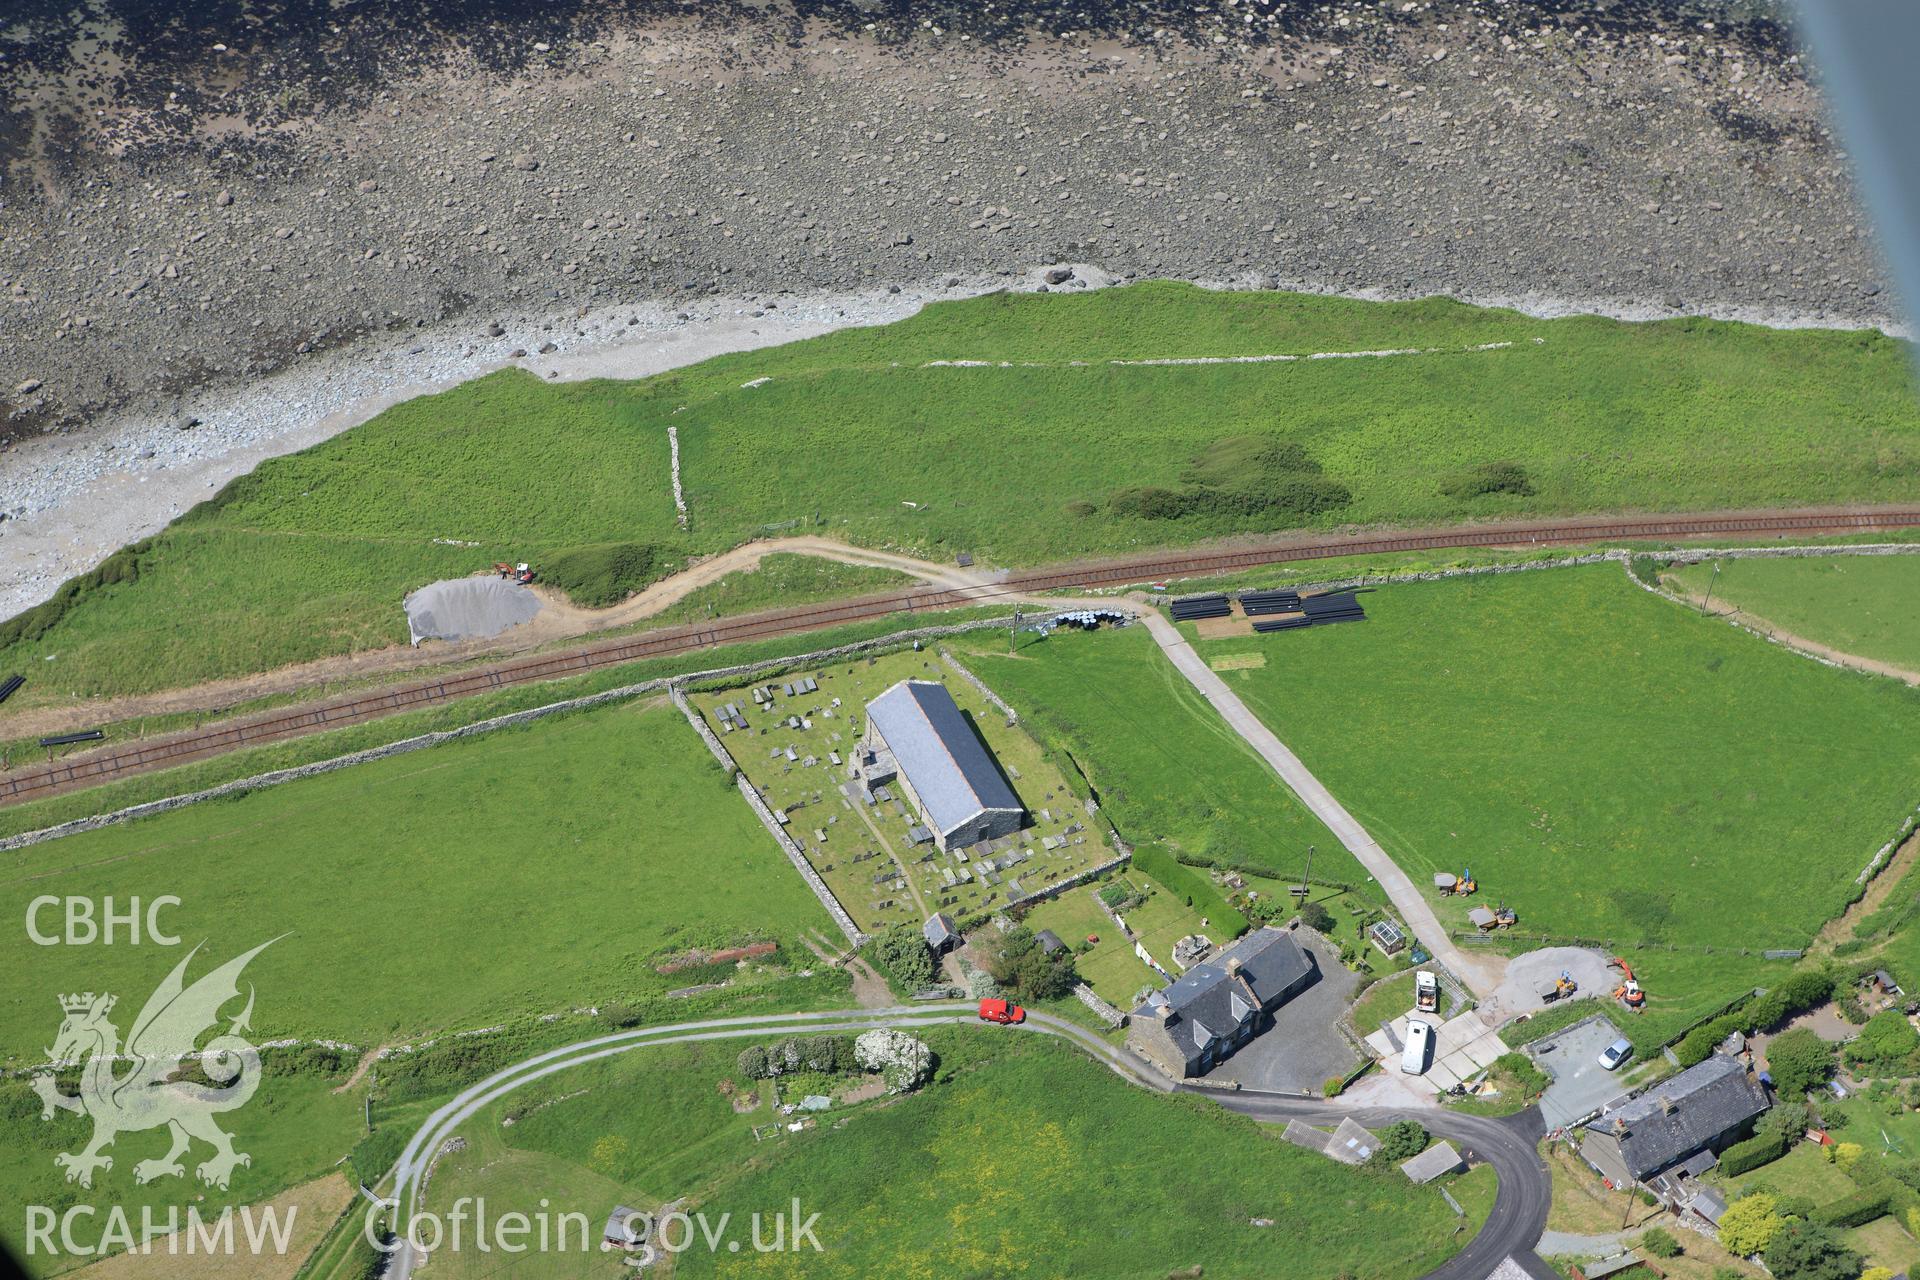 RCAHMW colour oblique aerial photograph of St Celynin's Church, Llangelynin. Taken on 02 June 2009 by Toby Driver